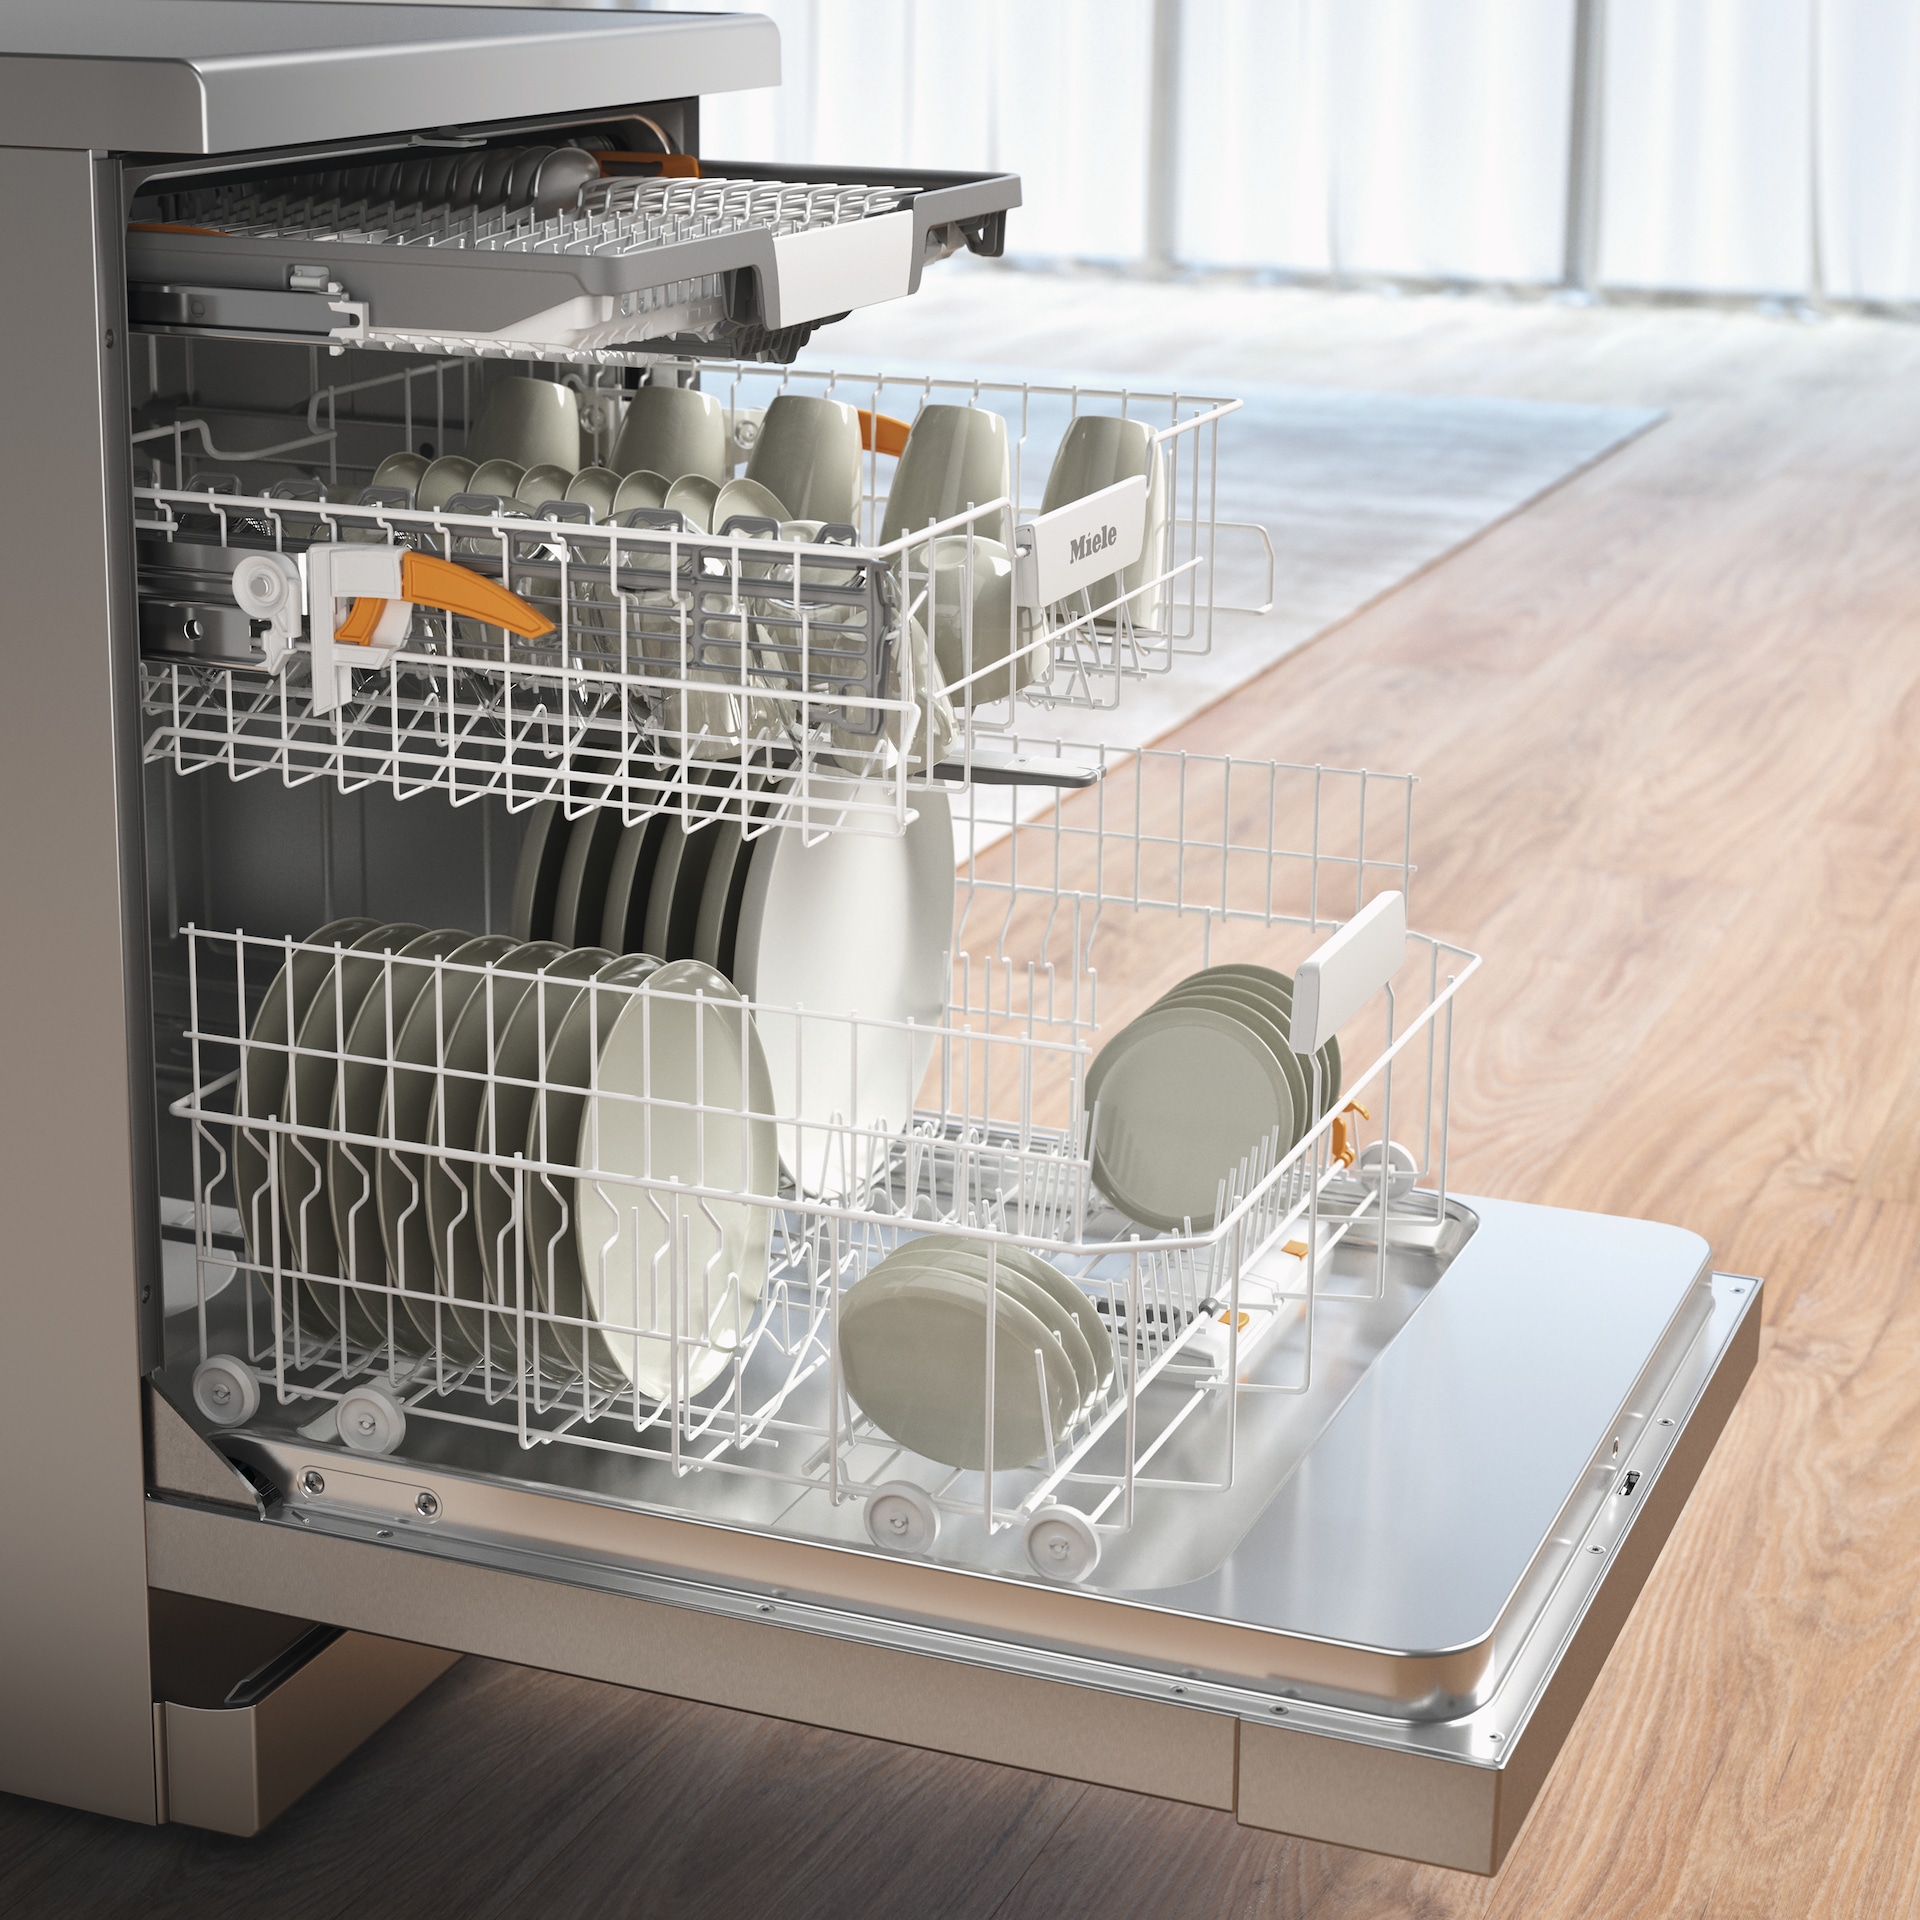 Dishwashers - G 5310 SC Front Active Plus CleanSteel front - 5